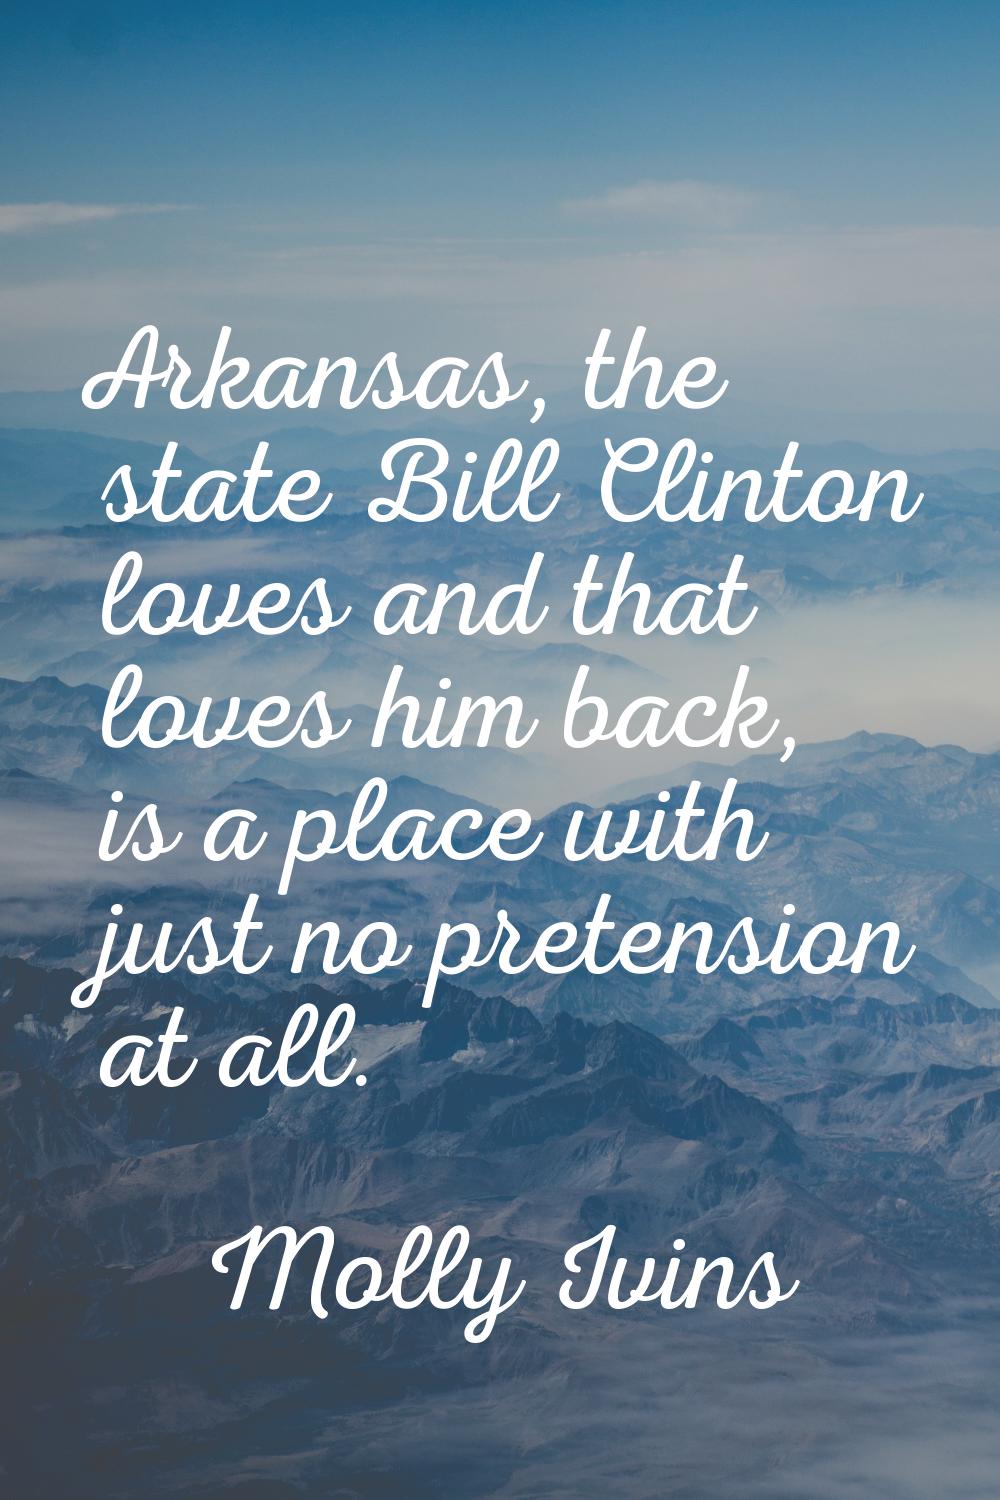 Arkansas, the state Bill Clinton loves and that loves him back, is a place with just no pretension 